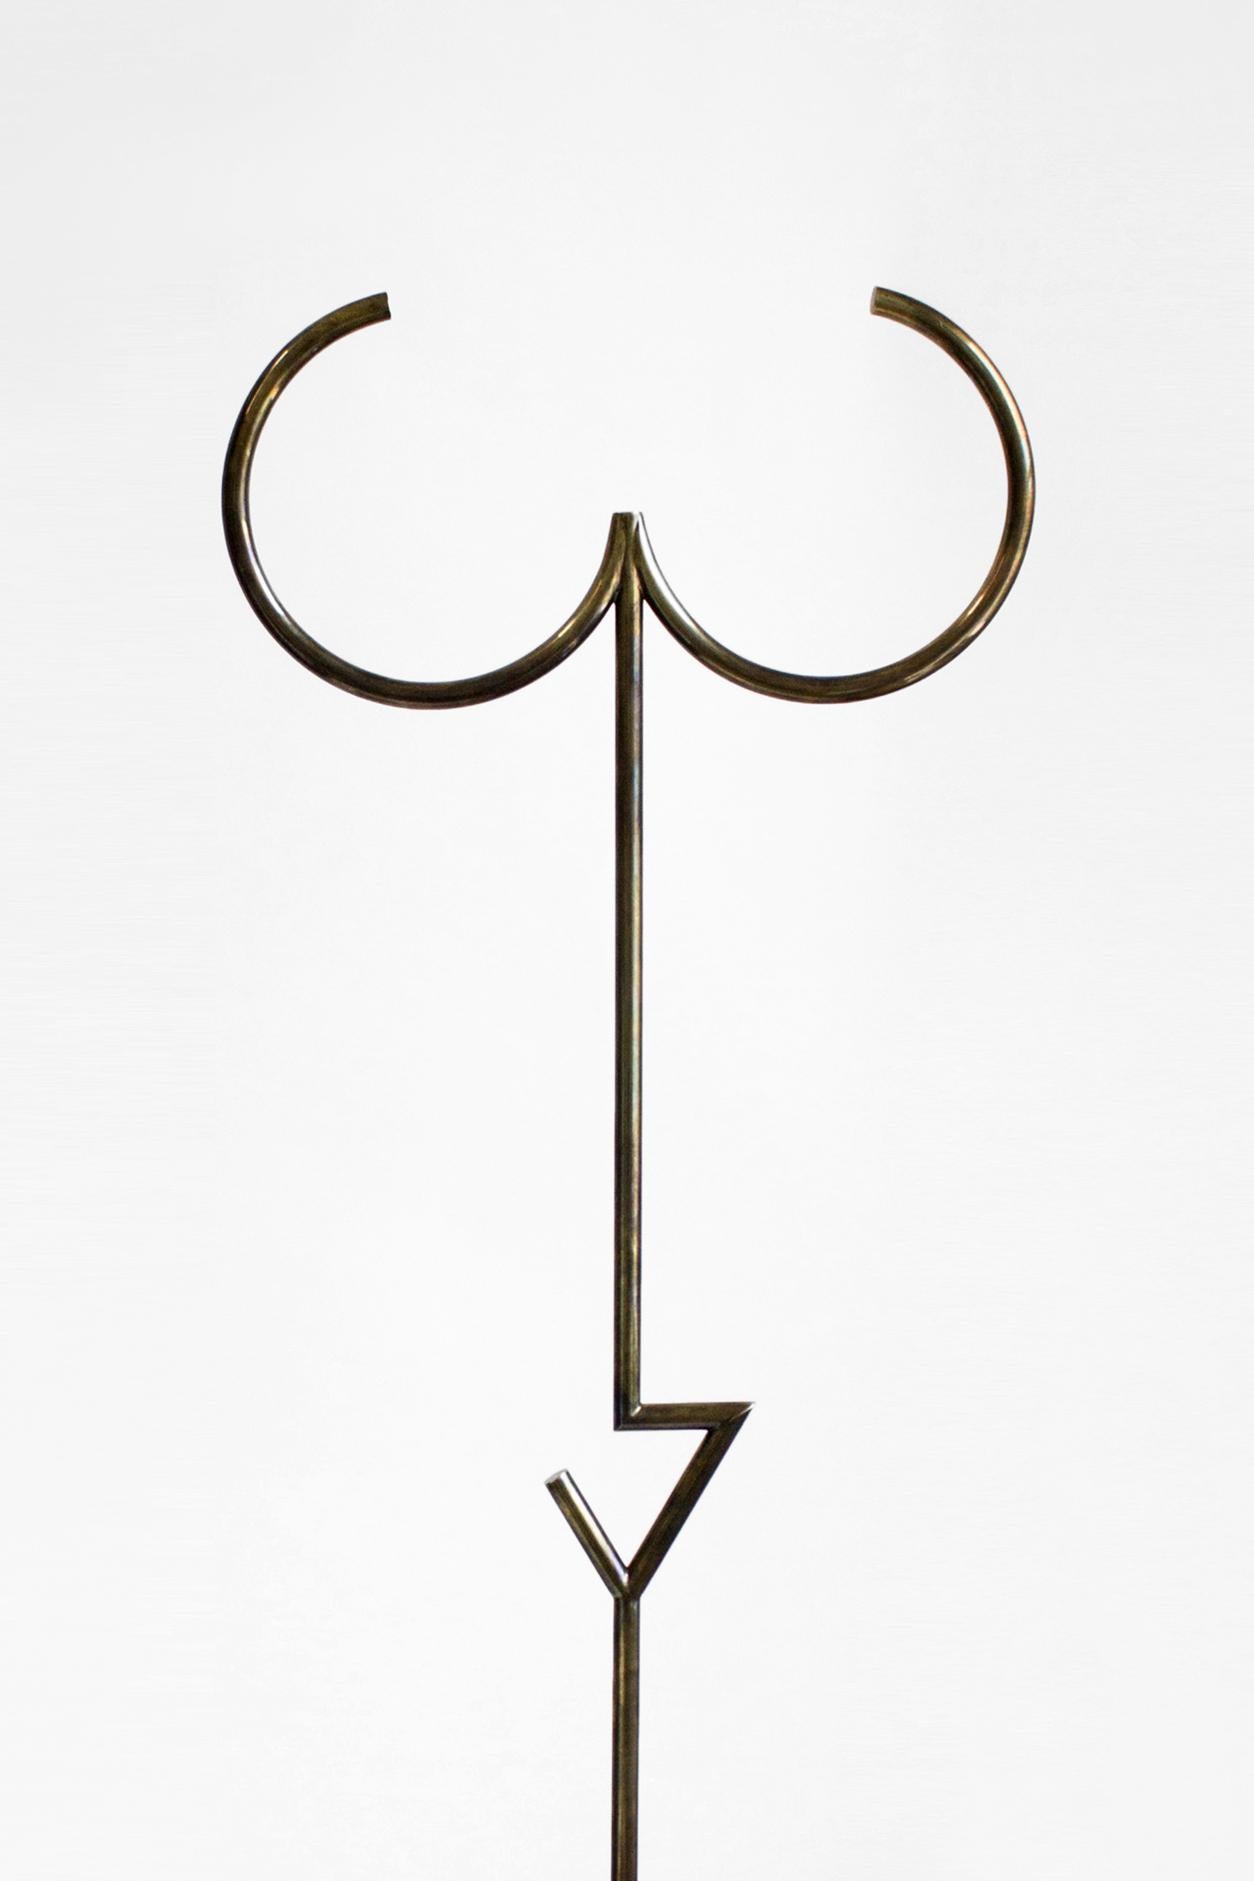 Material Lust [American, b.1981,1986]
Portmanteau HER, 2013. 
Shown in brushed brass. 
Measures: 68